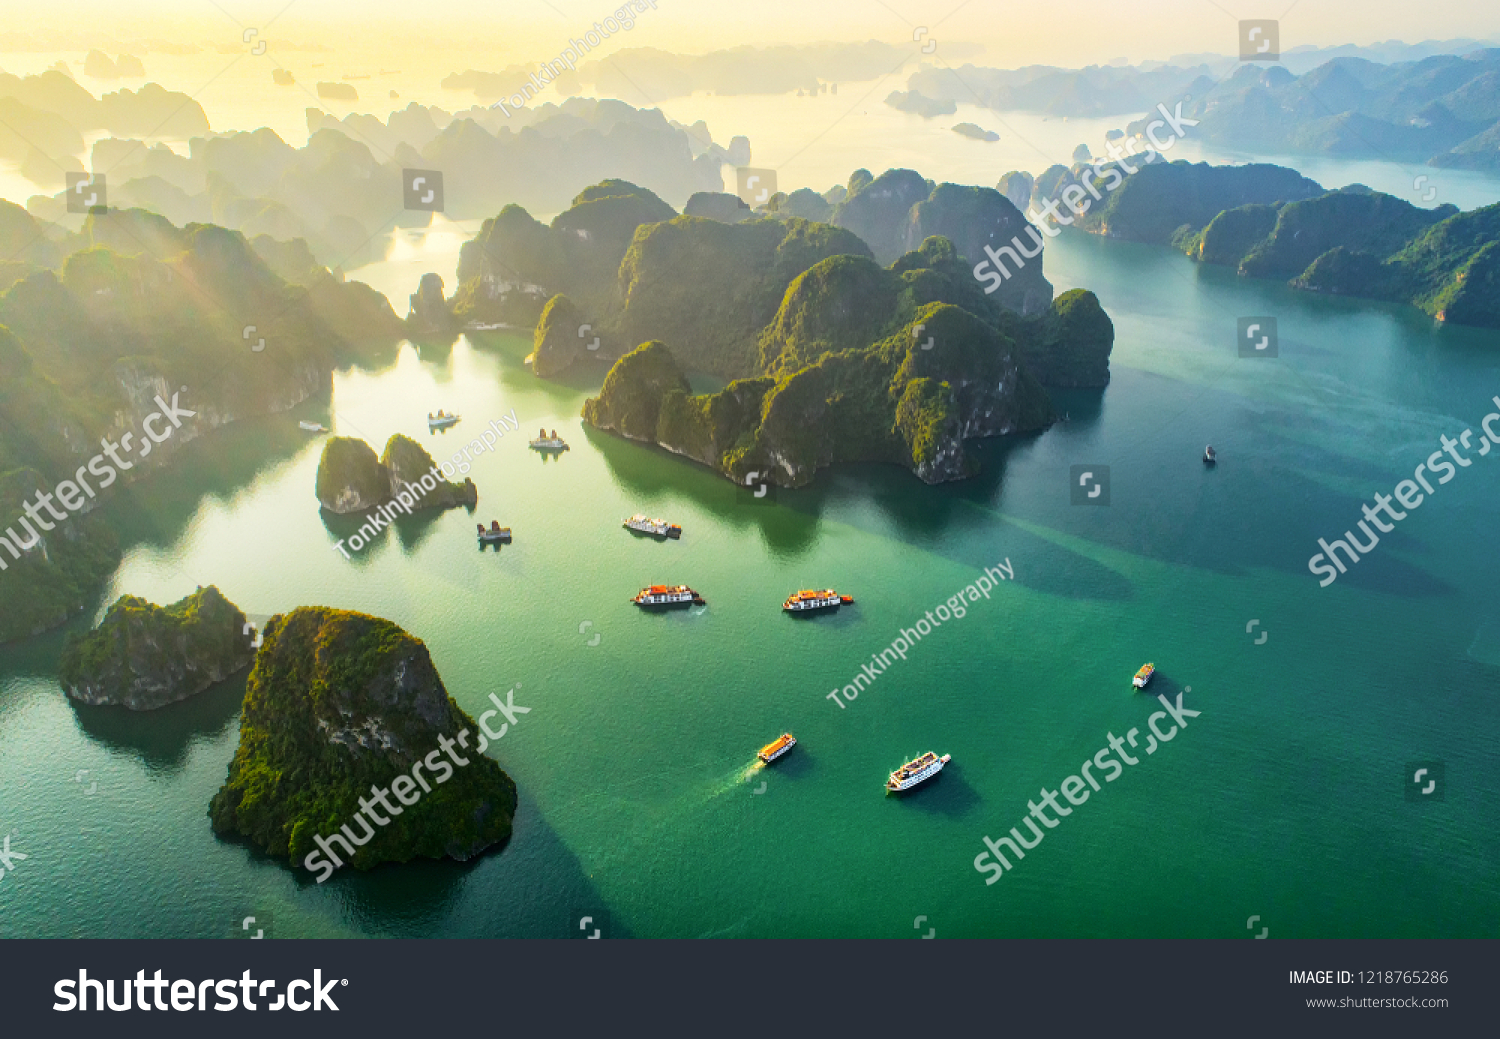 Aerial view floating fishing village and rock island, Halong Bay, Vietnam, Southeast Asia. UNESCO World Heritage Site. Junk boat cruise to Ha Long Bay. Popular landmark, famous destination of Vietnam
 #1218765286